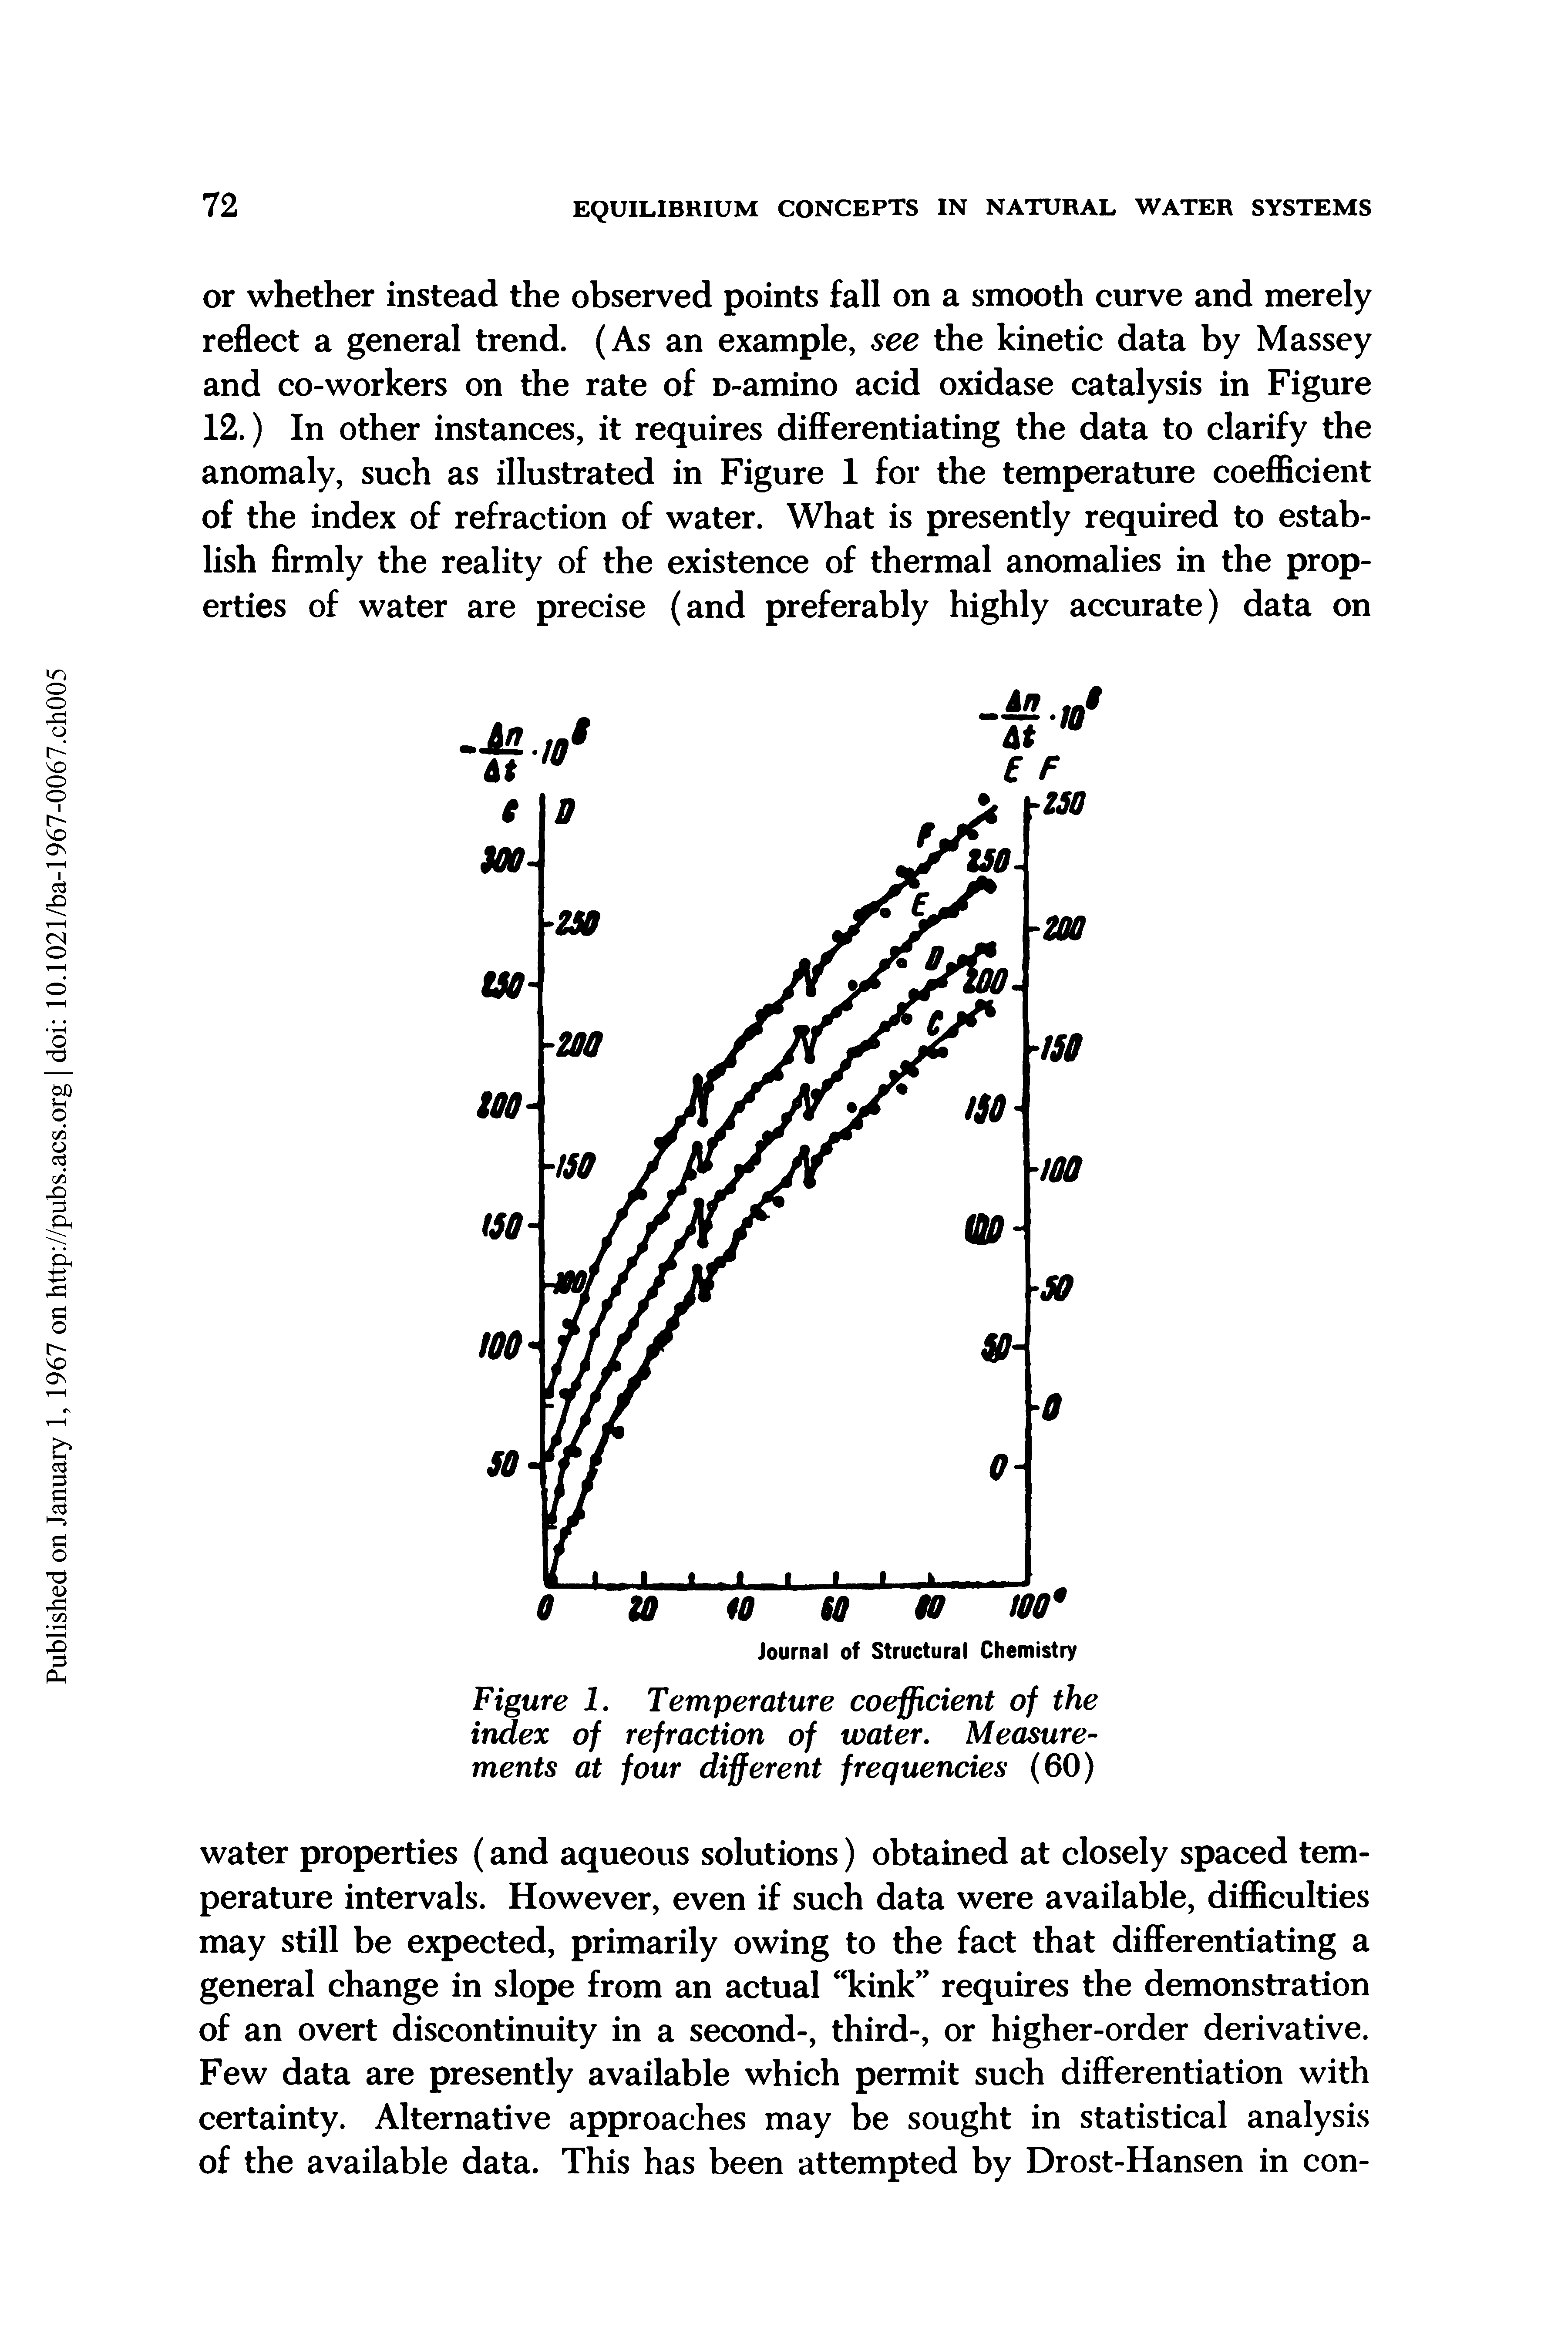 Figure 1. Temperature coefficient of the index of refraction of water. Measurements at four different frequencies (60)...